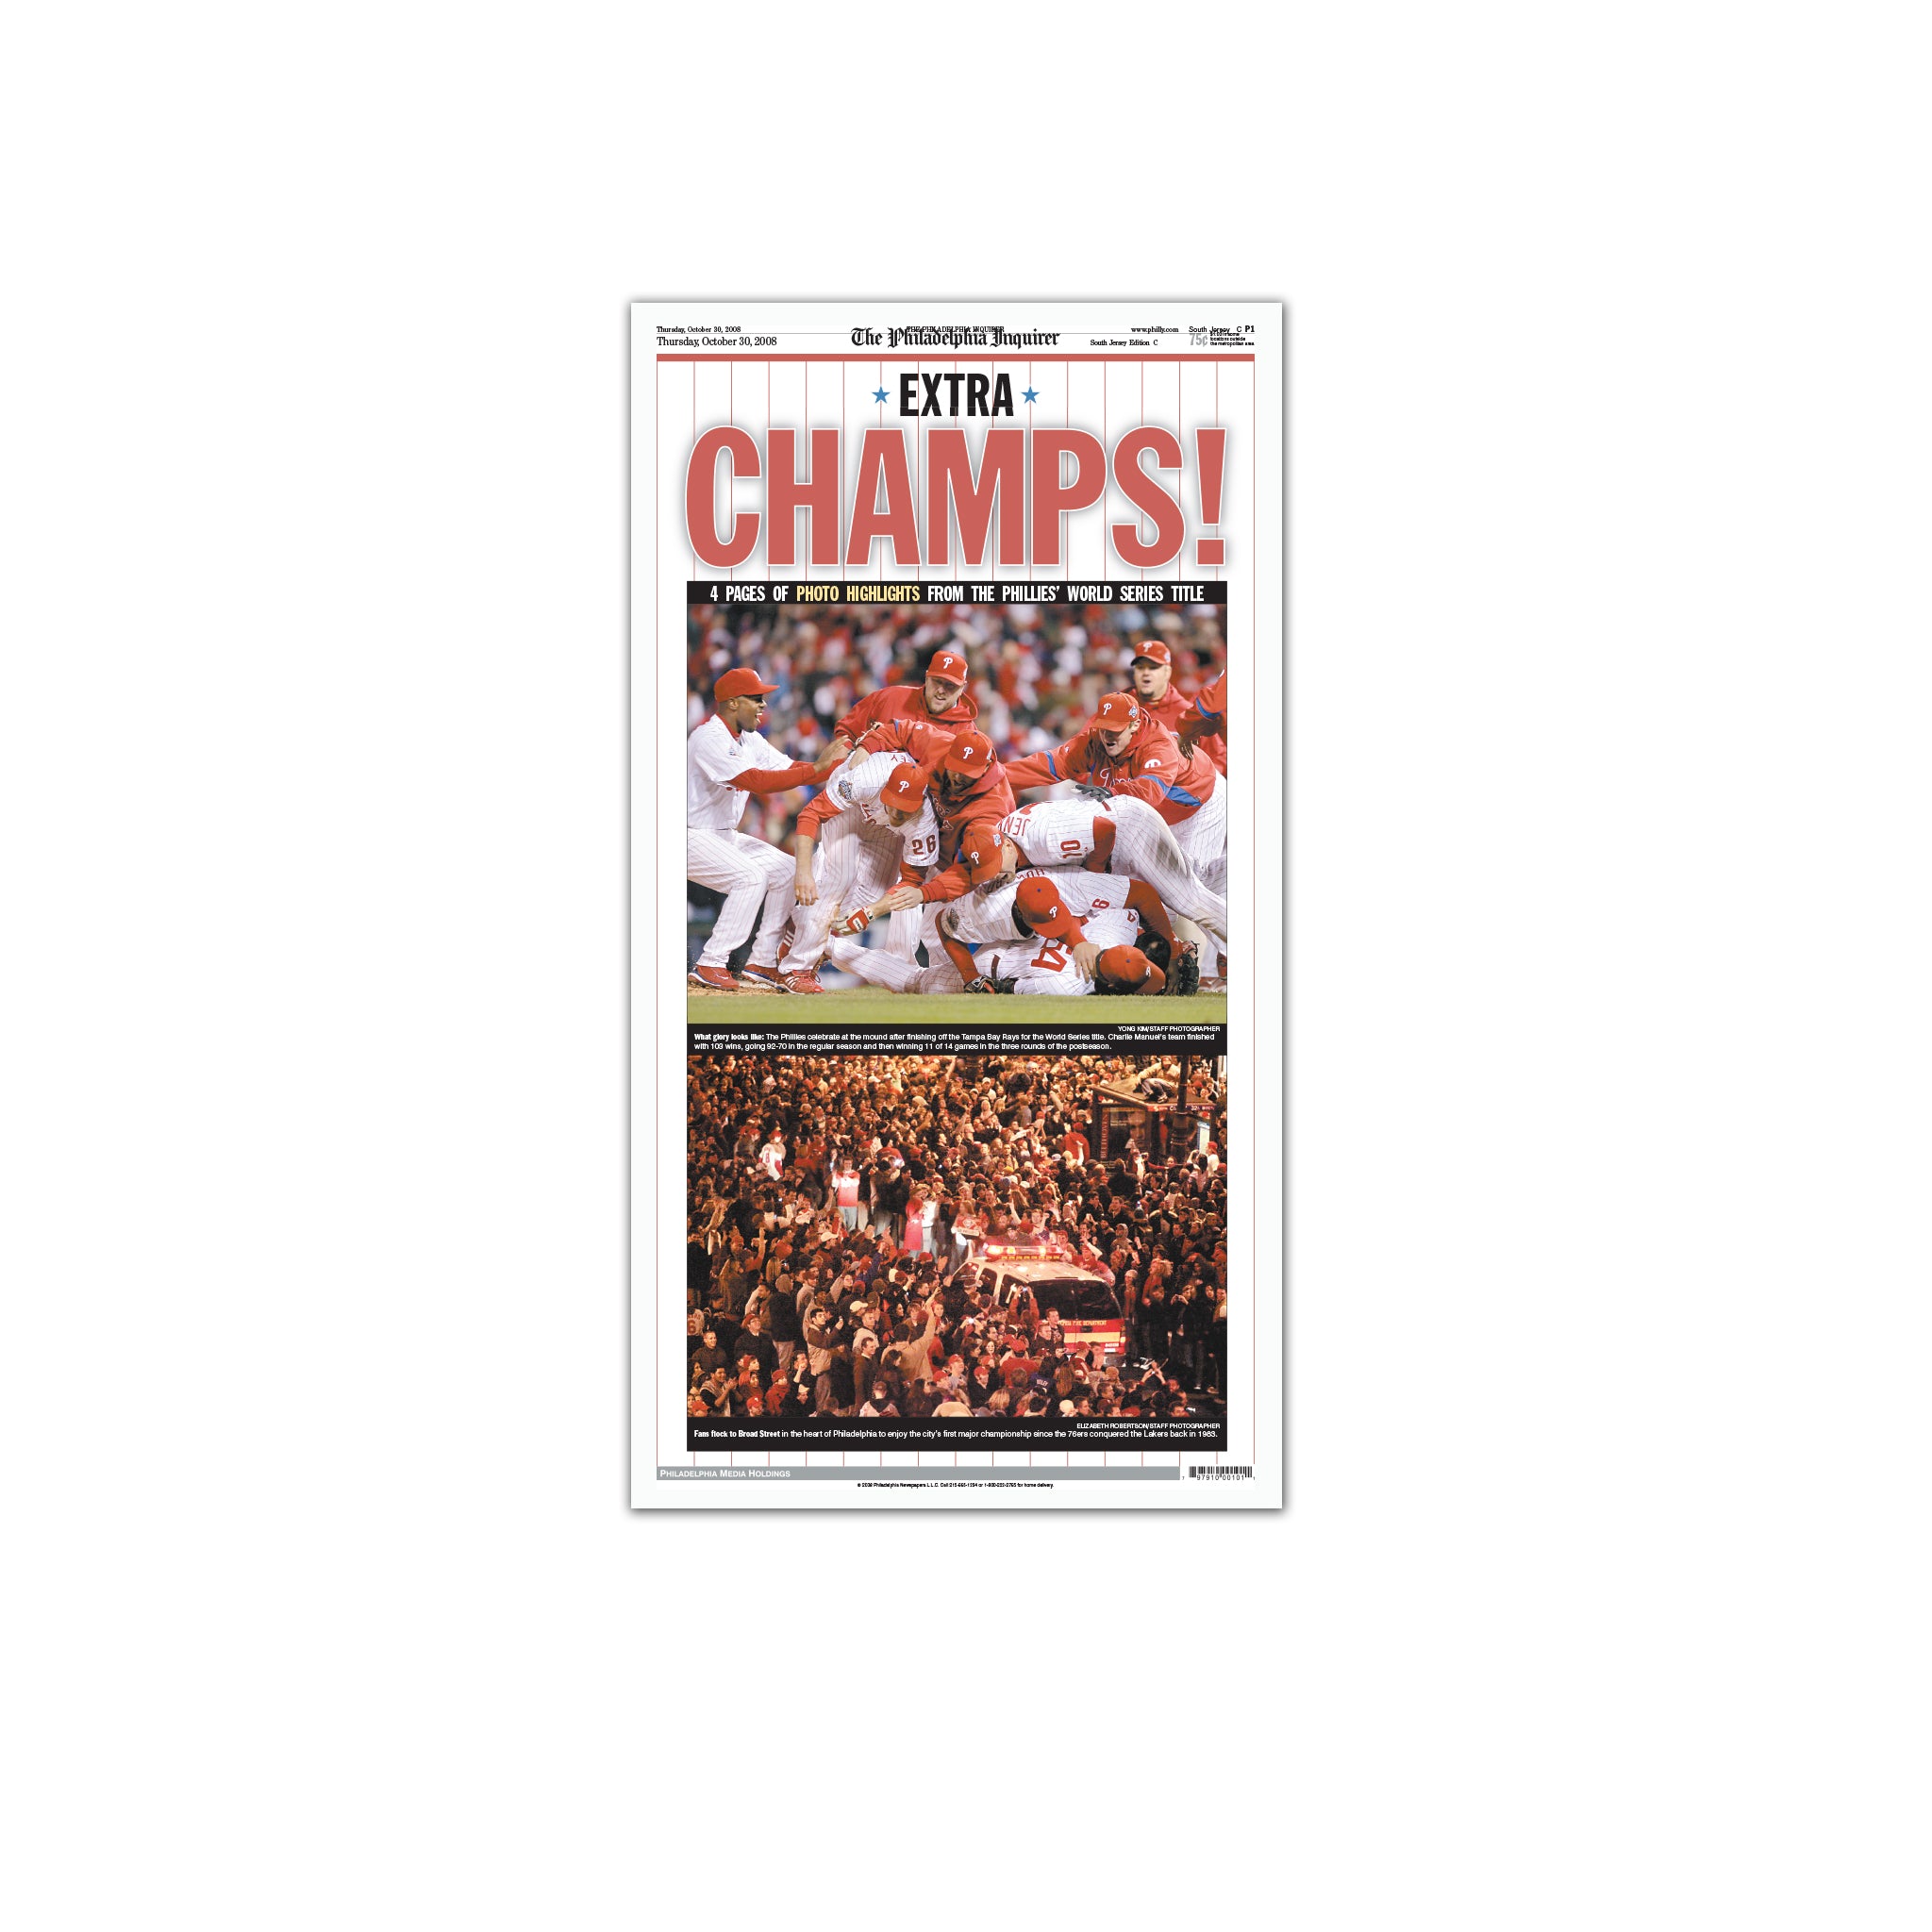 Phillies 2008 World Series Champions Poster Sealed Rare Mint